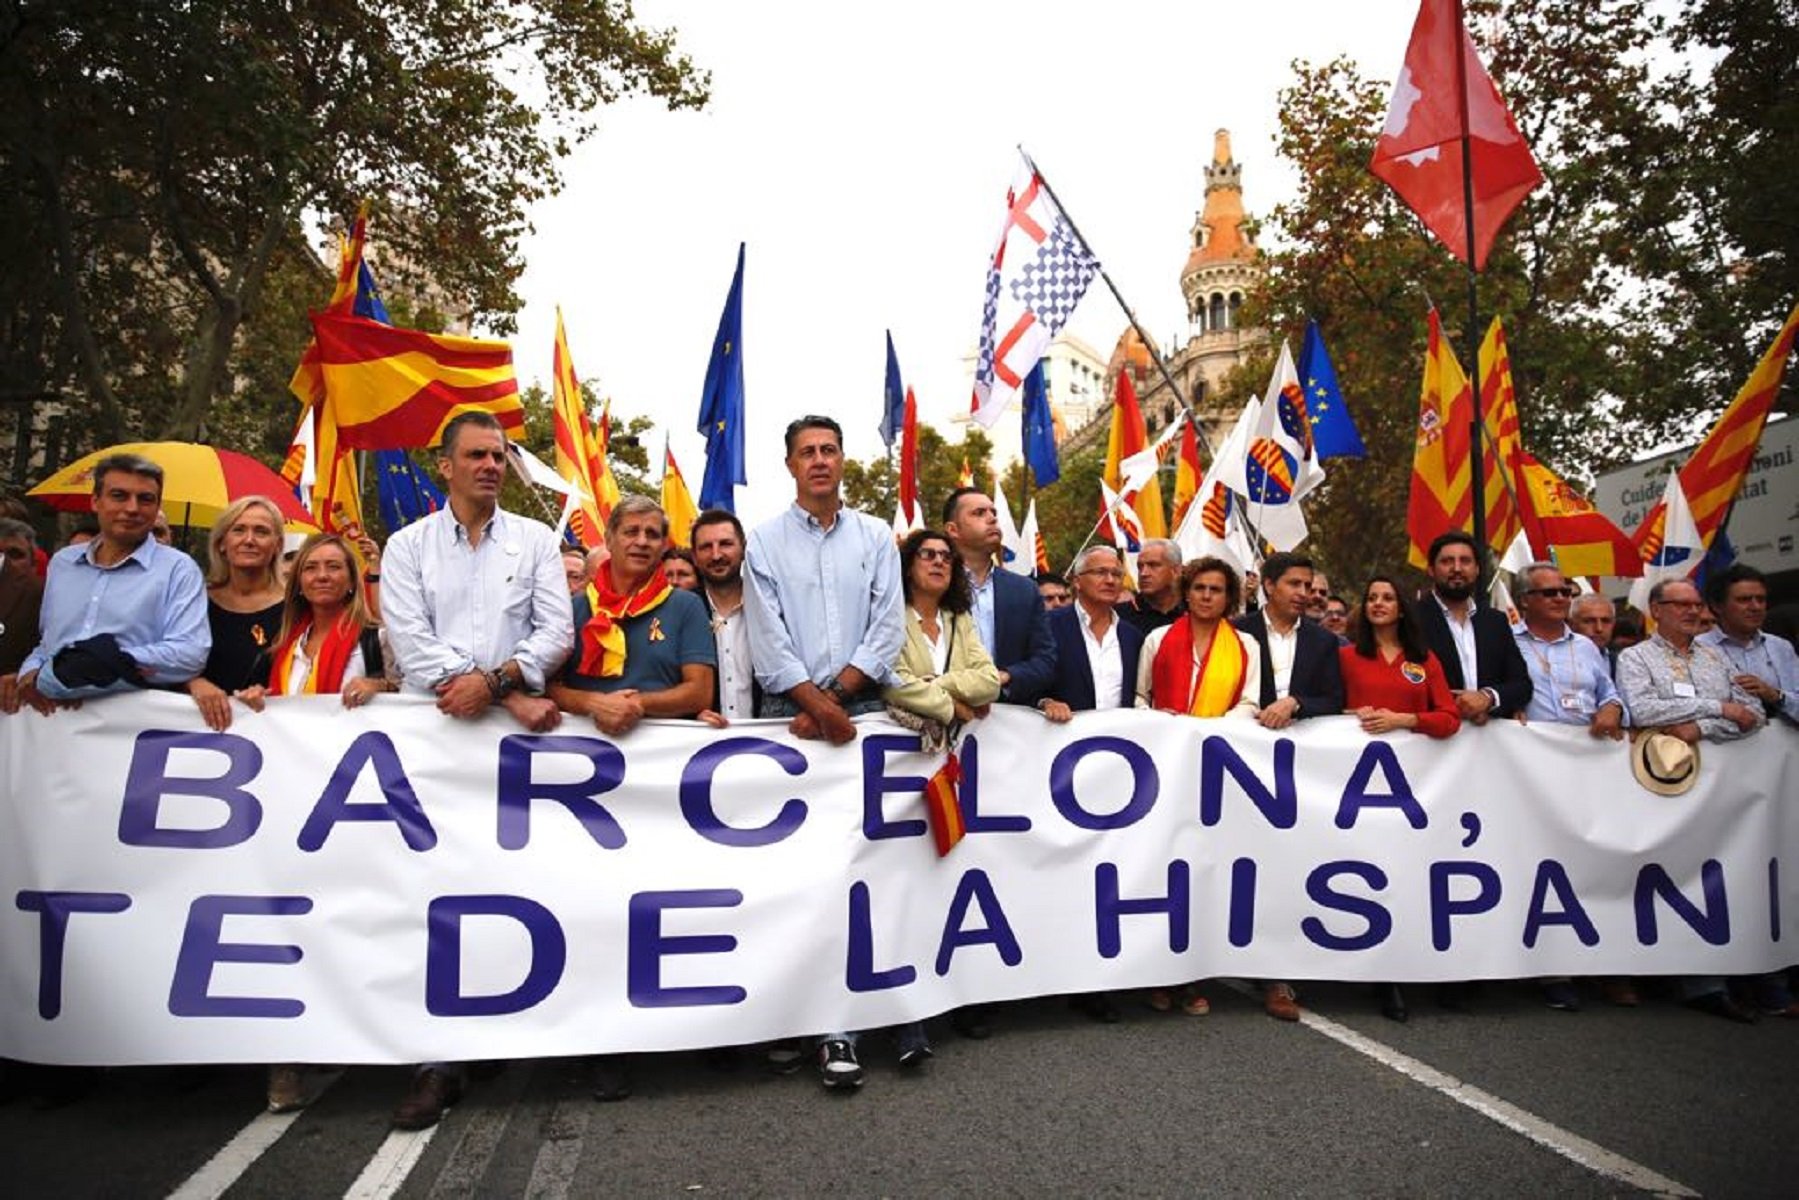 PP and Cs, side by side with far-right Vox party at Spanish nationalist rally